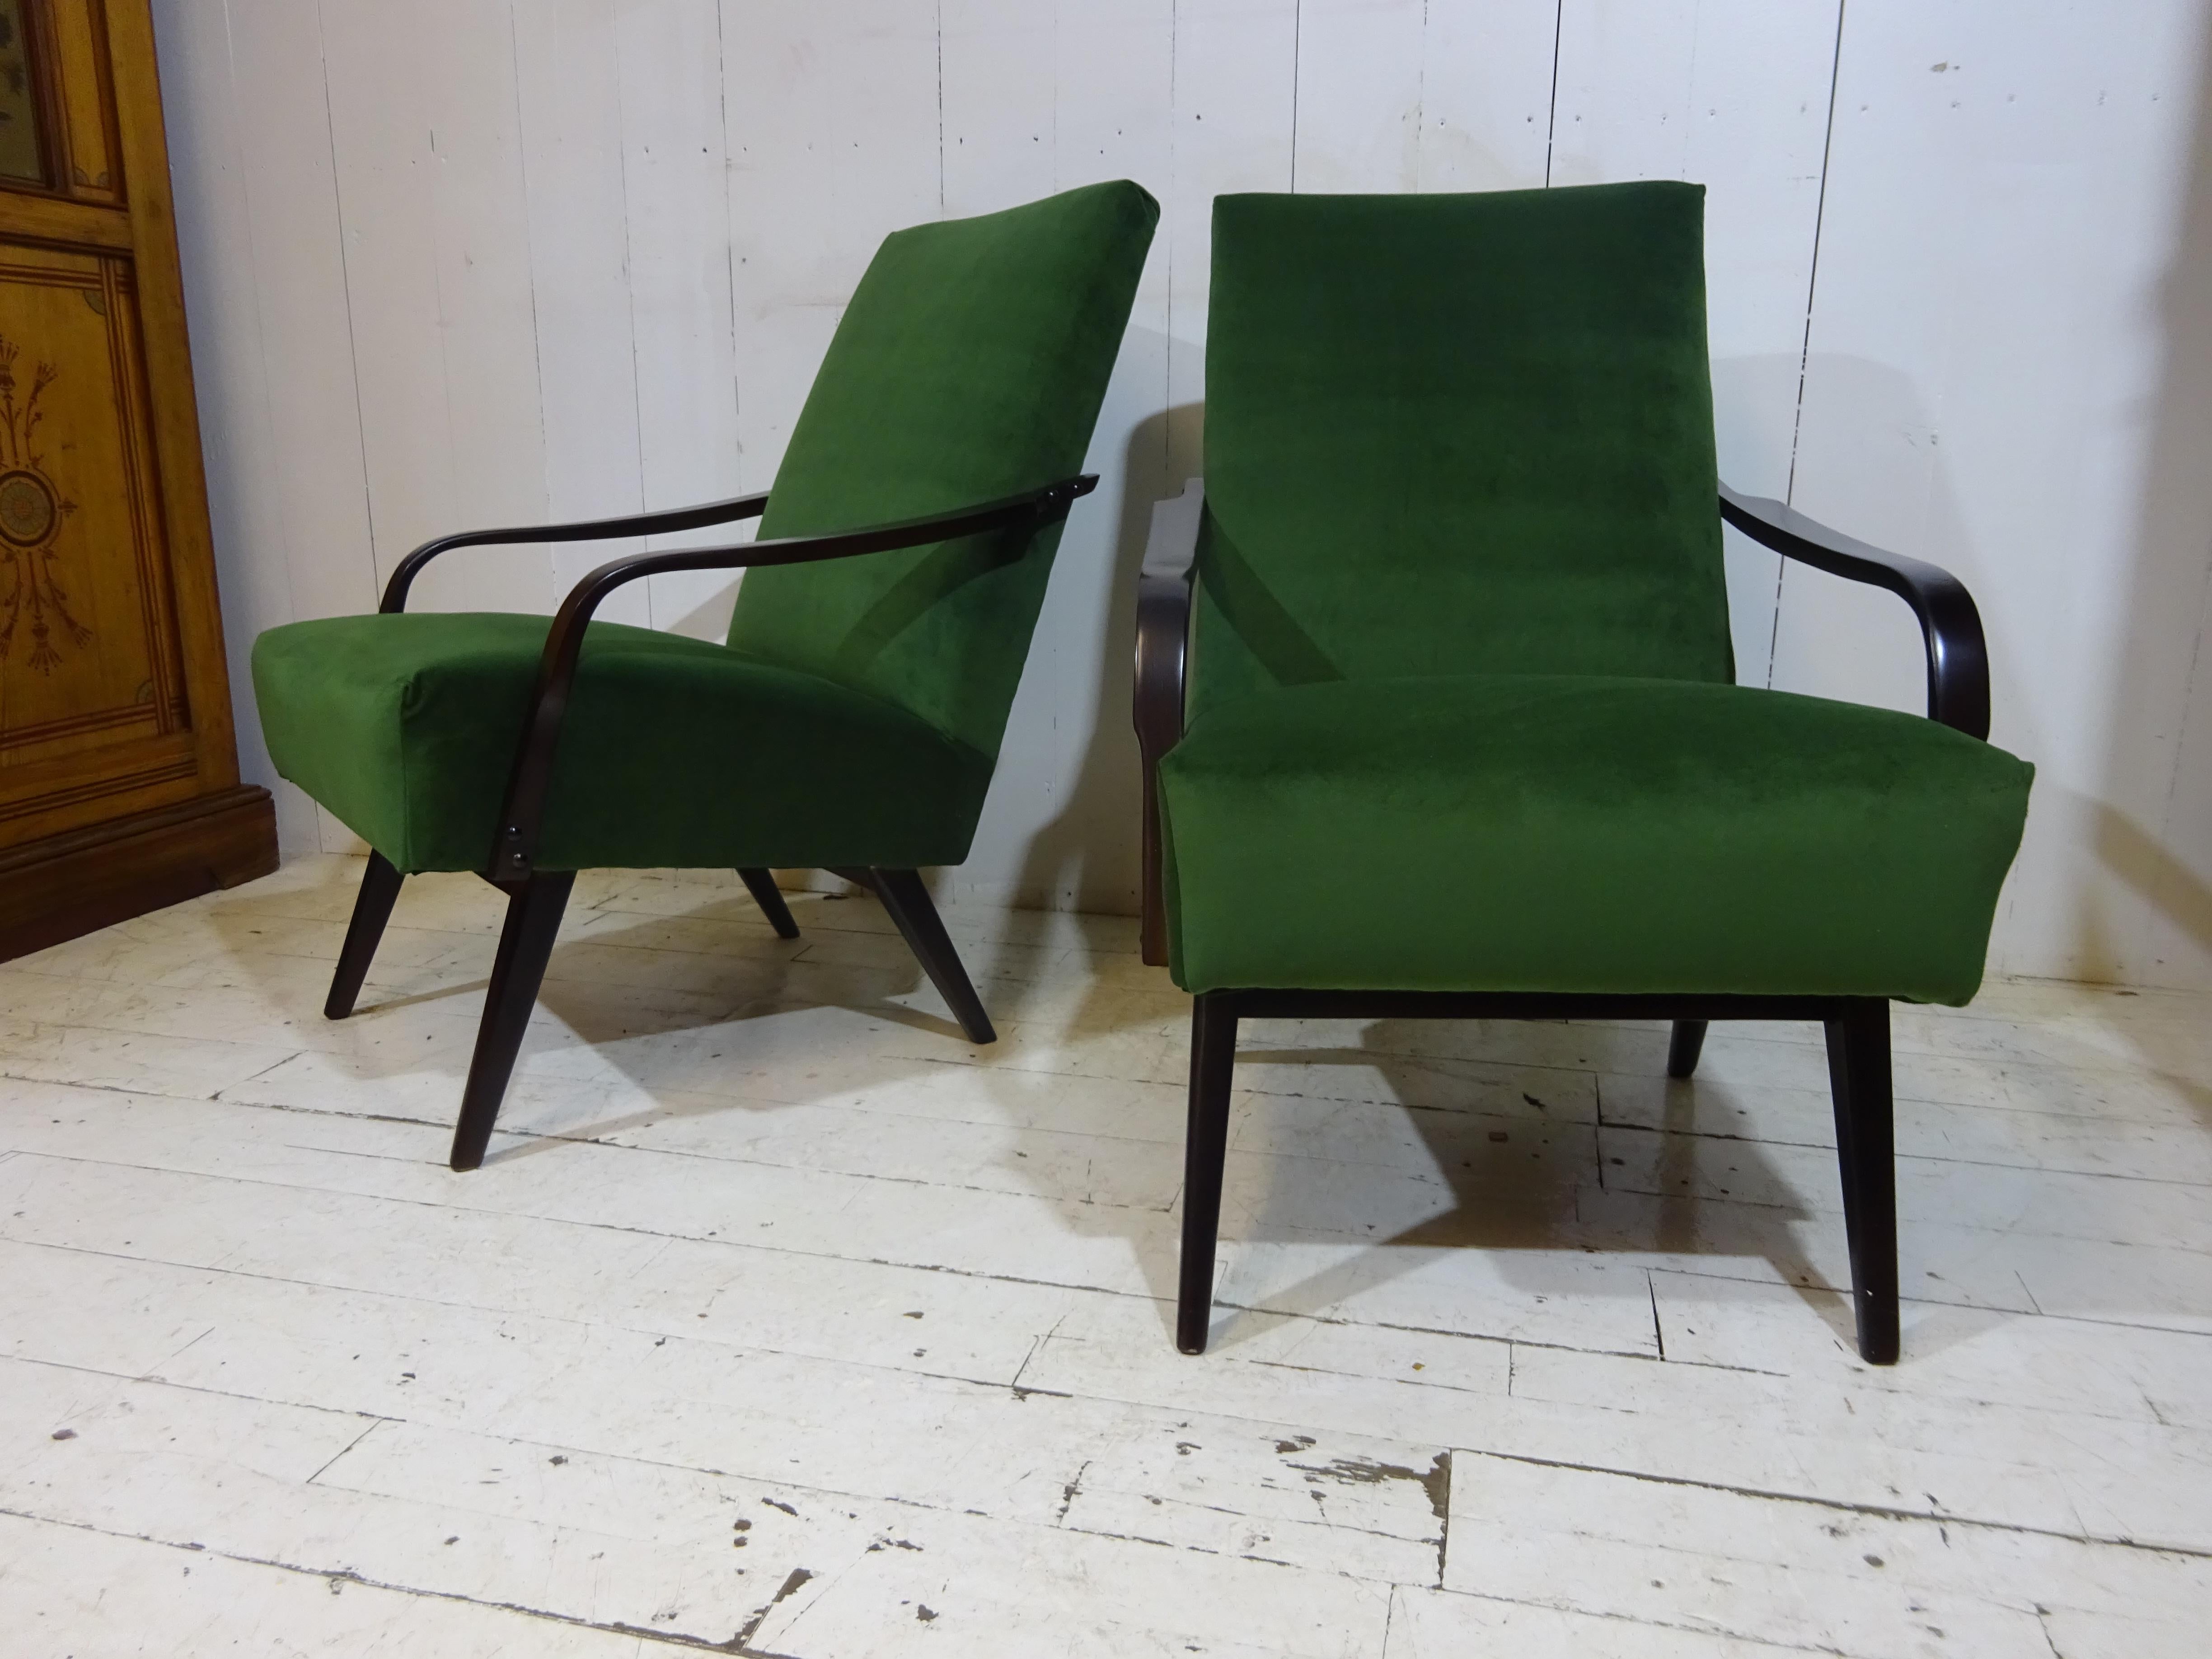 A beautiful design by famous designer Jaroslav Smidekand manufactured by Jitona. Well made with beautiful shape these chairs look as cool as the day they were manufactured. Now becoming a rare find we have carefully restored the chair back to its